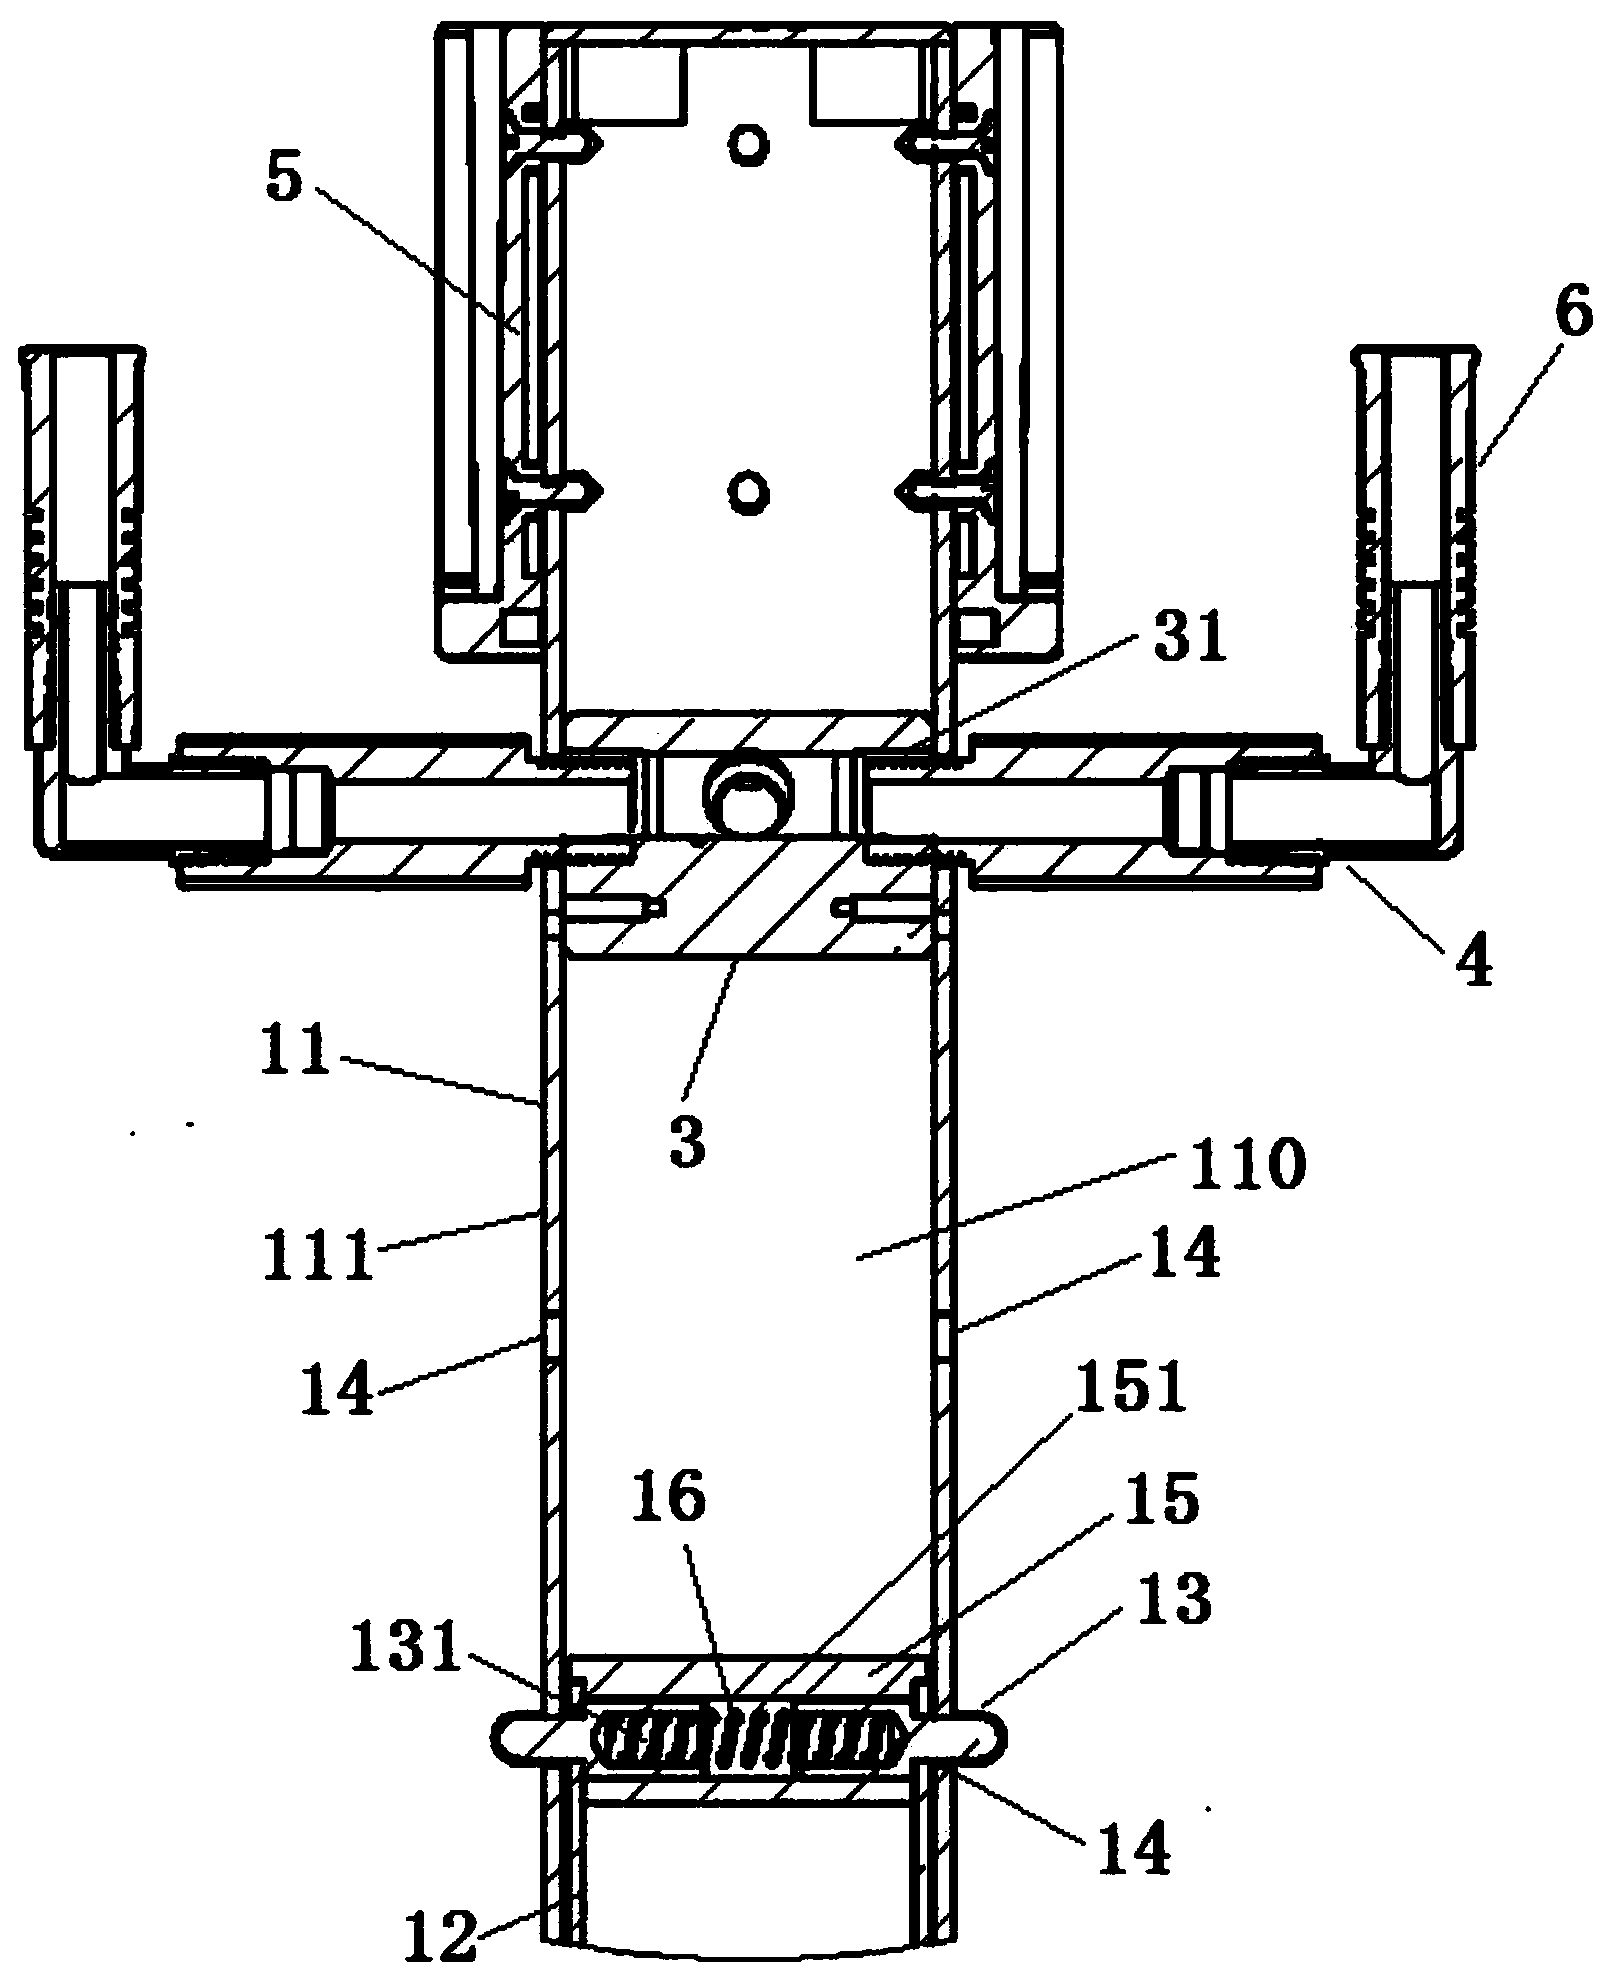 Support used for medical waste liquid collecting system